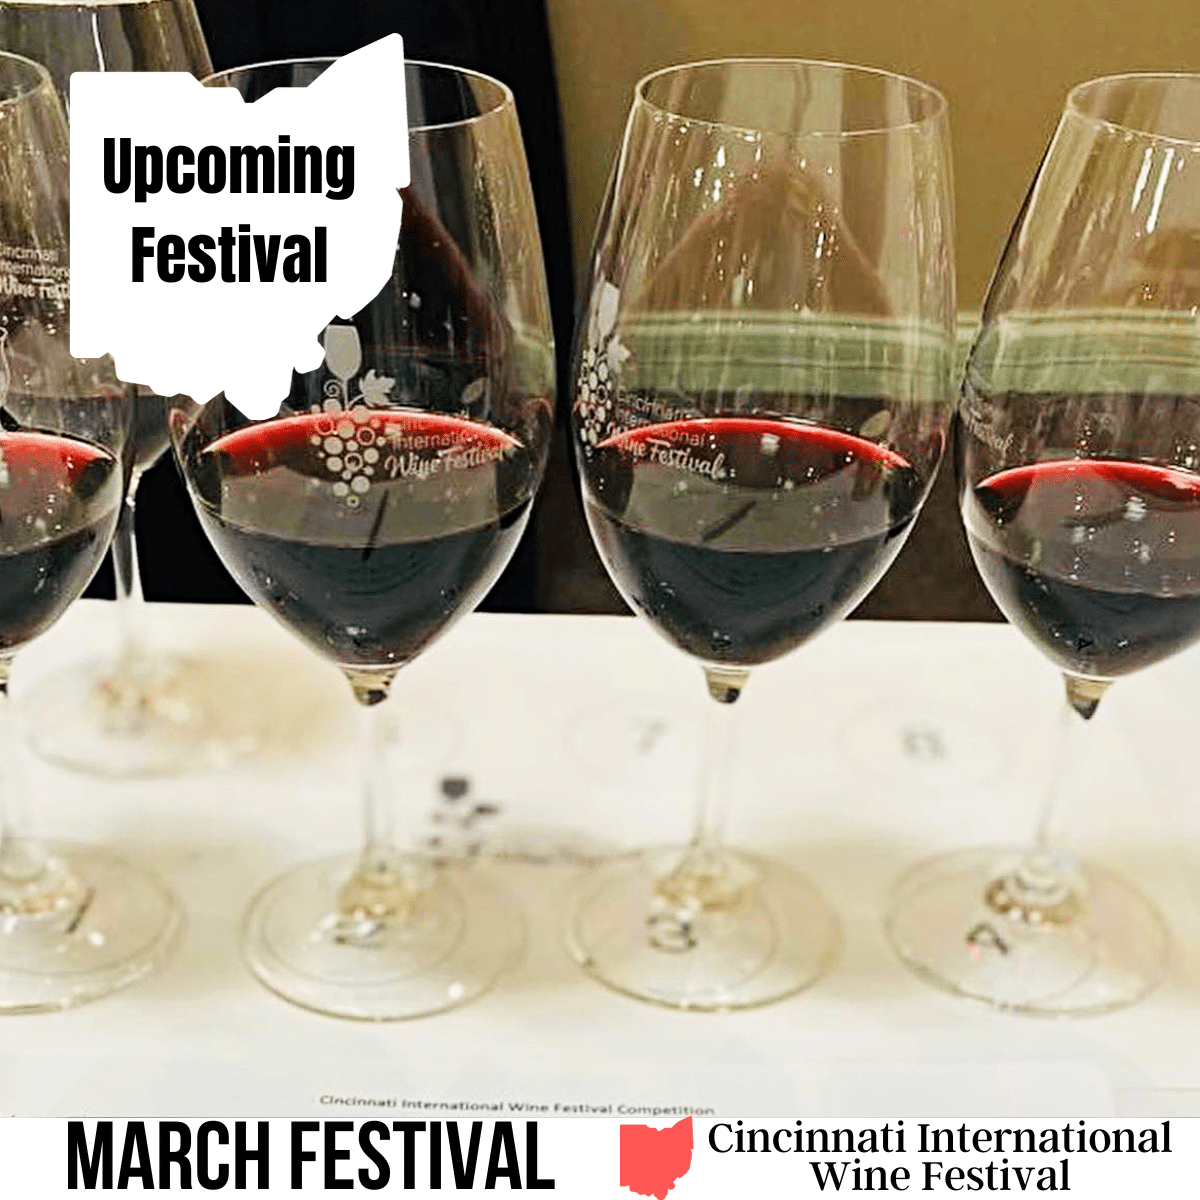 Square image with a photo of four wine glass partially filled with red wine, sitting on a table. A white strip across the bottom has text that says March Festival Cincinnati International Wine Festival . A white shape of Ohio in the upper left corner has text that says upcoming festival